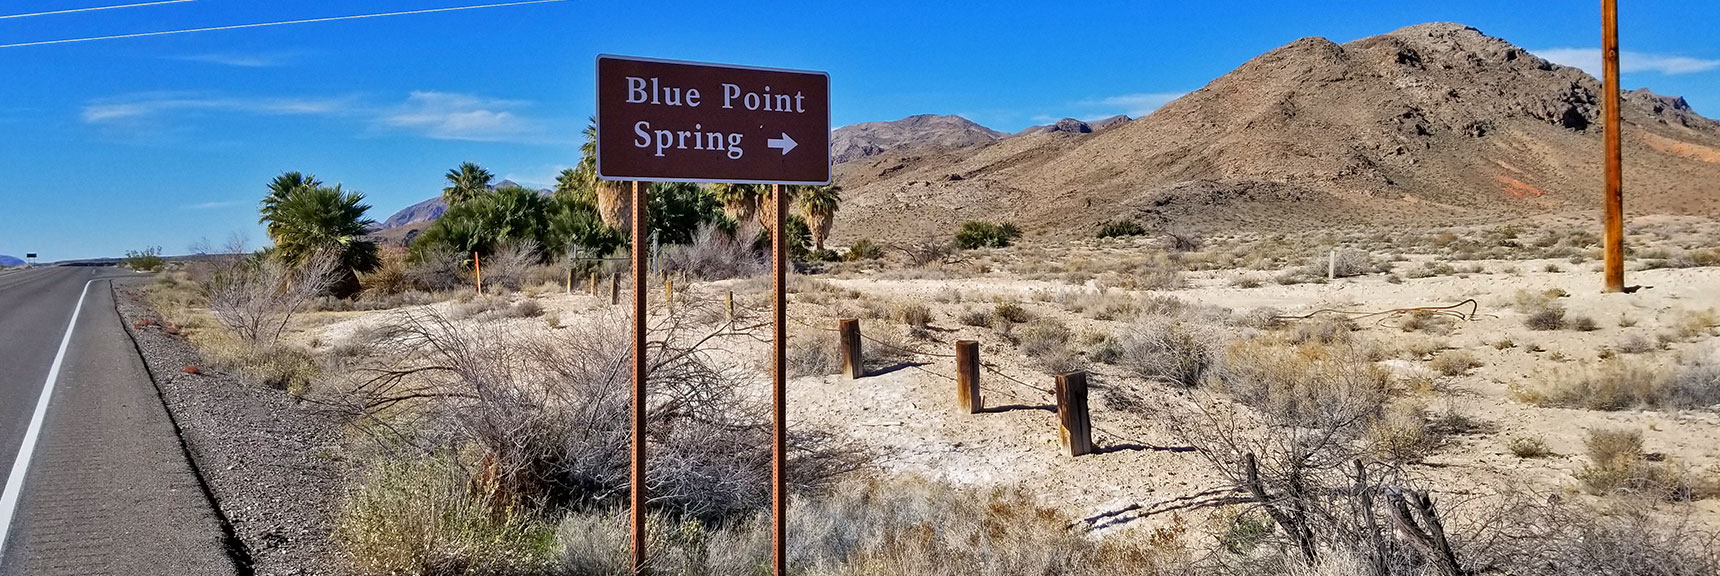 Blue Point Spring On Northshore Road in Lake Mead National Park, Nevada